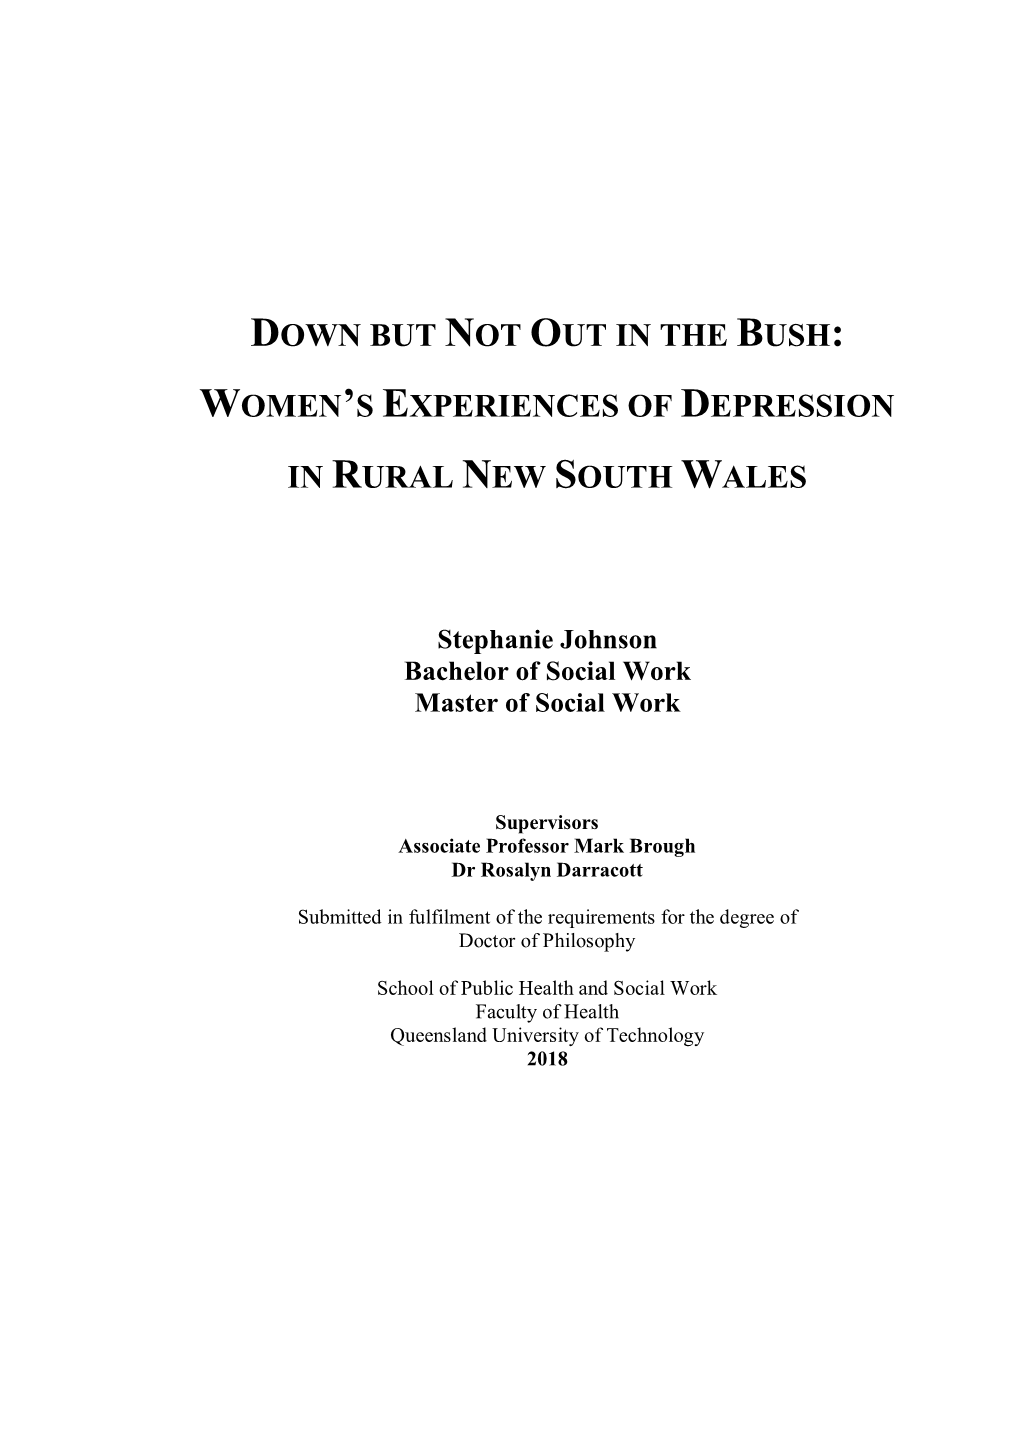 Down but Not out in the Bush: Women's Experiences of Depression